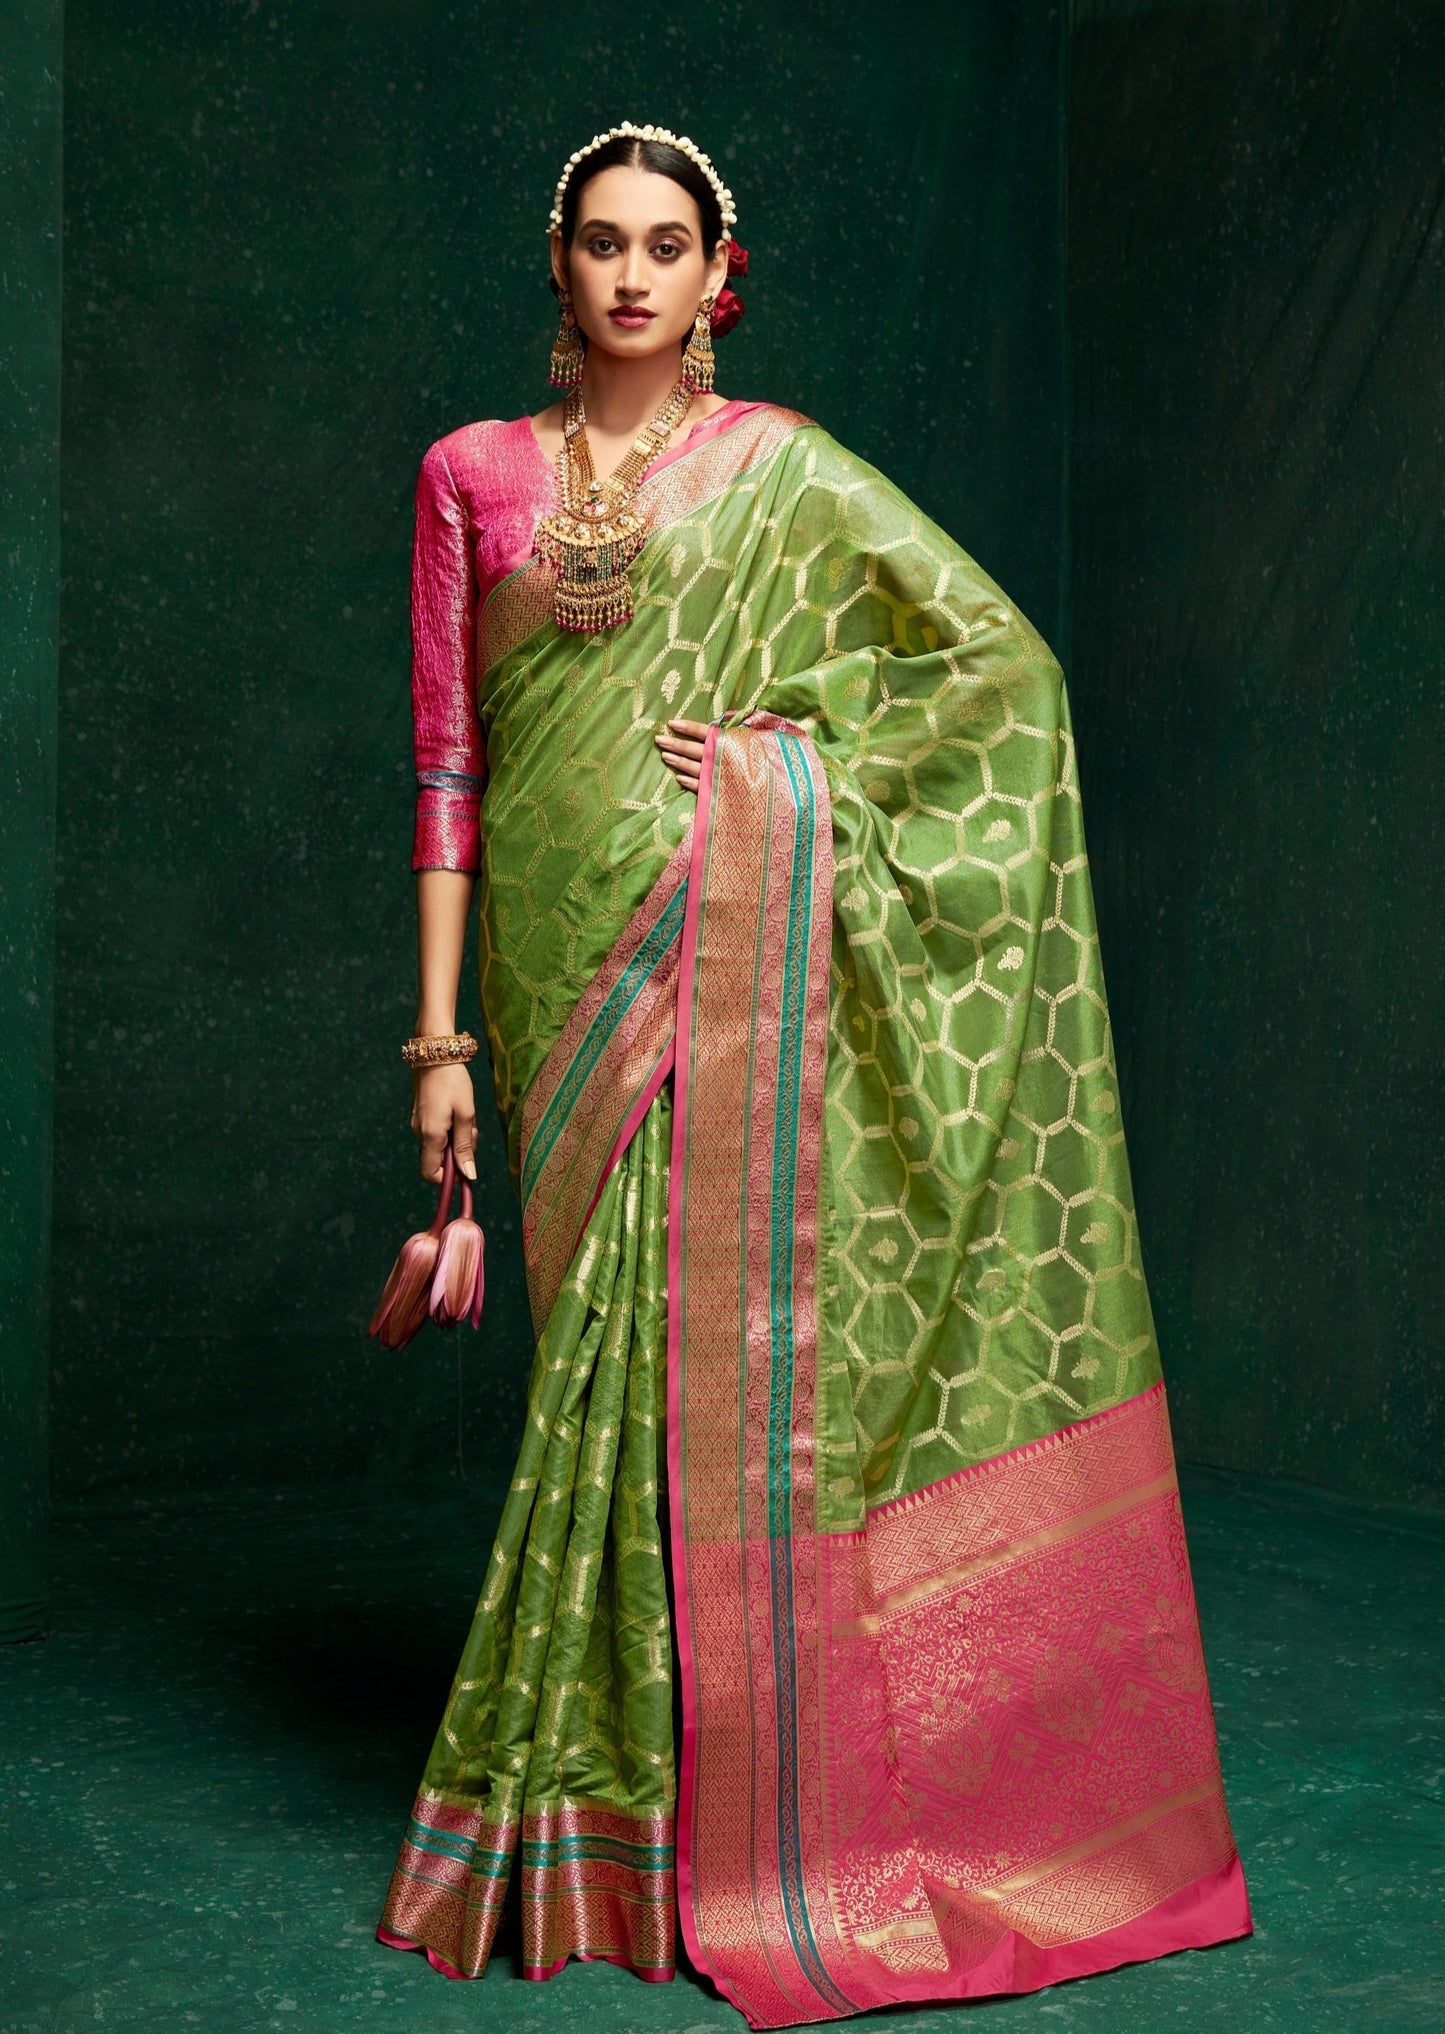 Woman standing in green banarasi silk saree holding a pink lotus in right hand